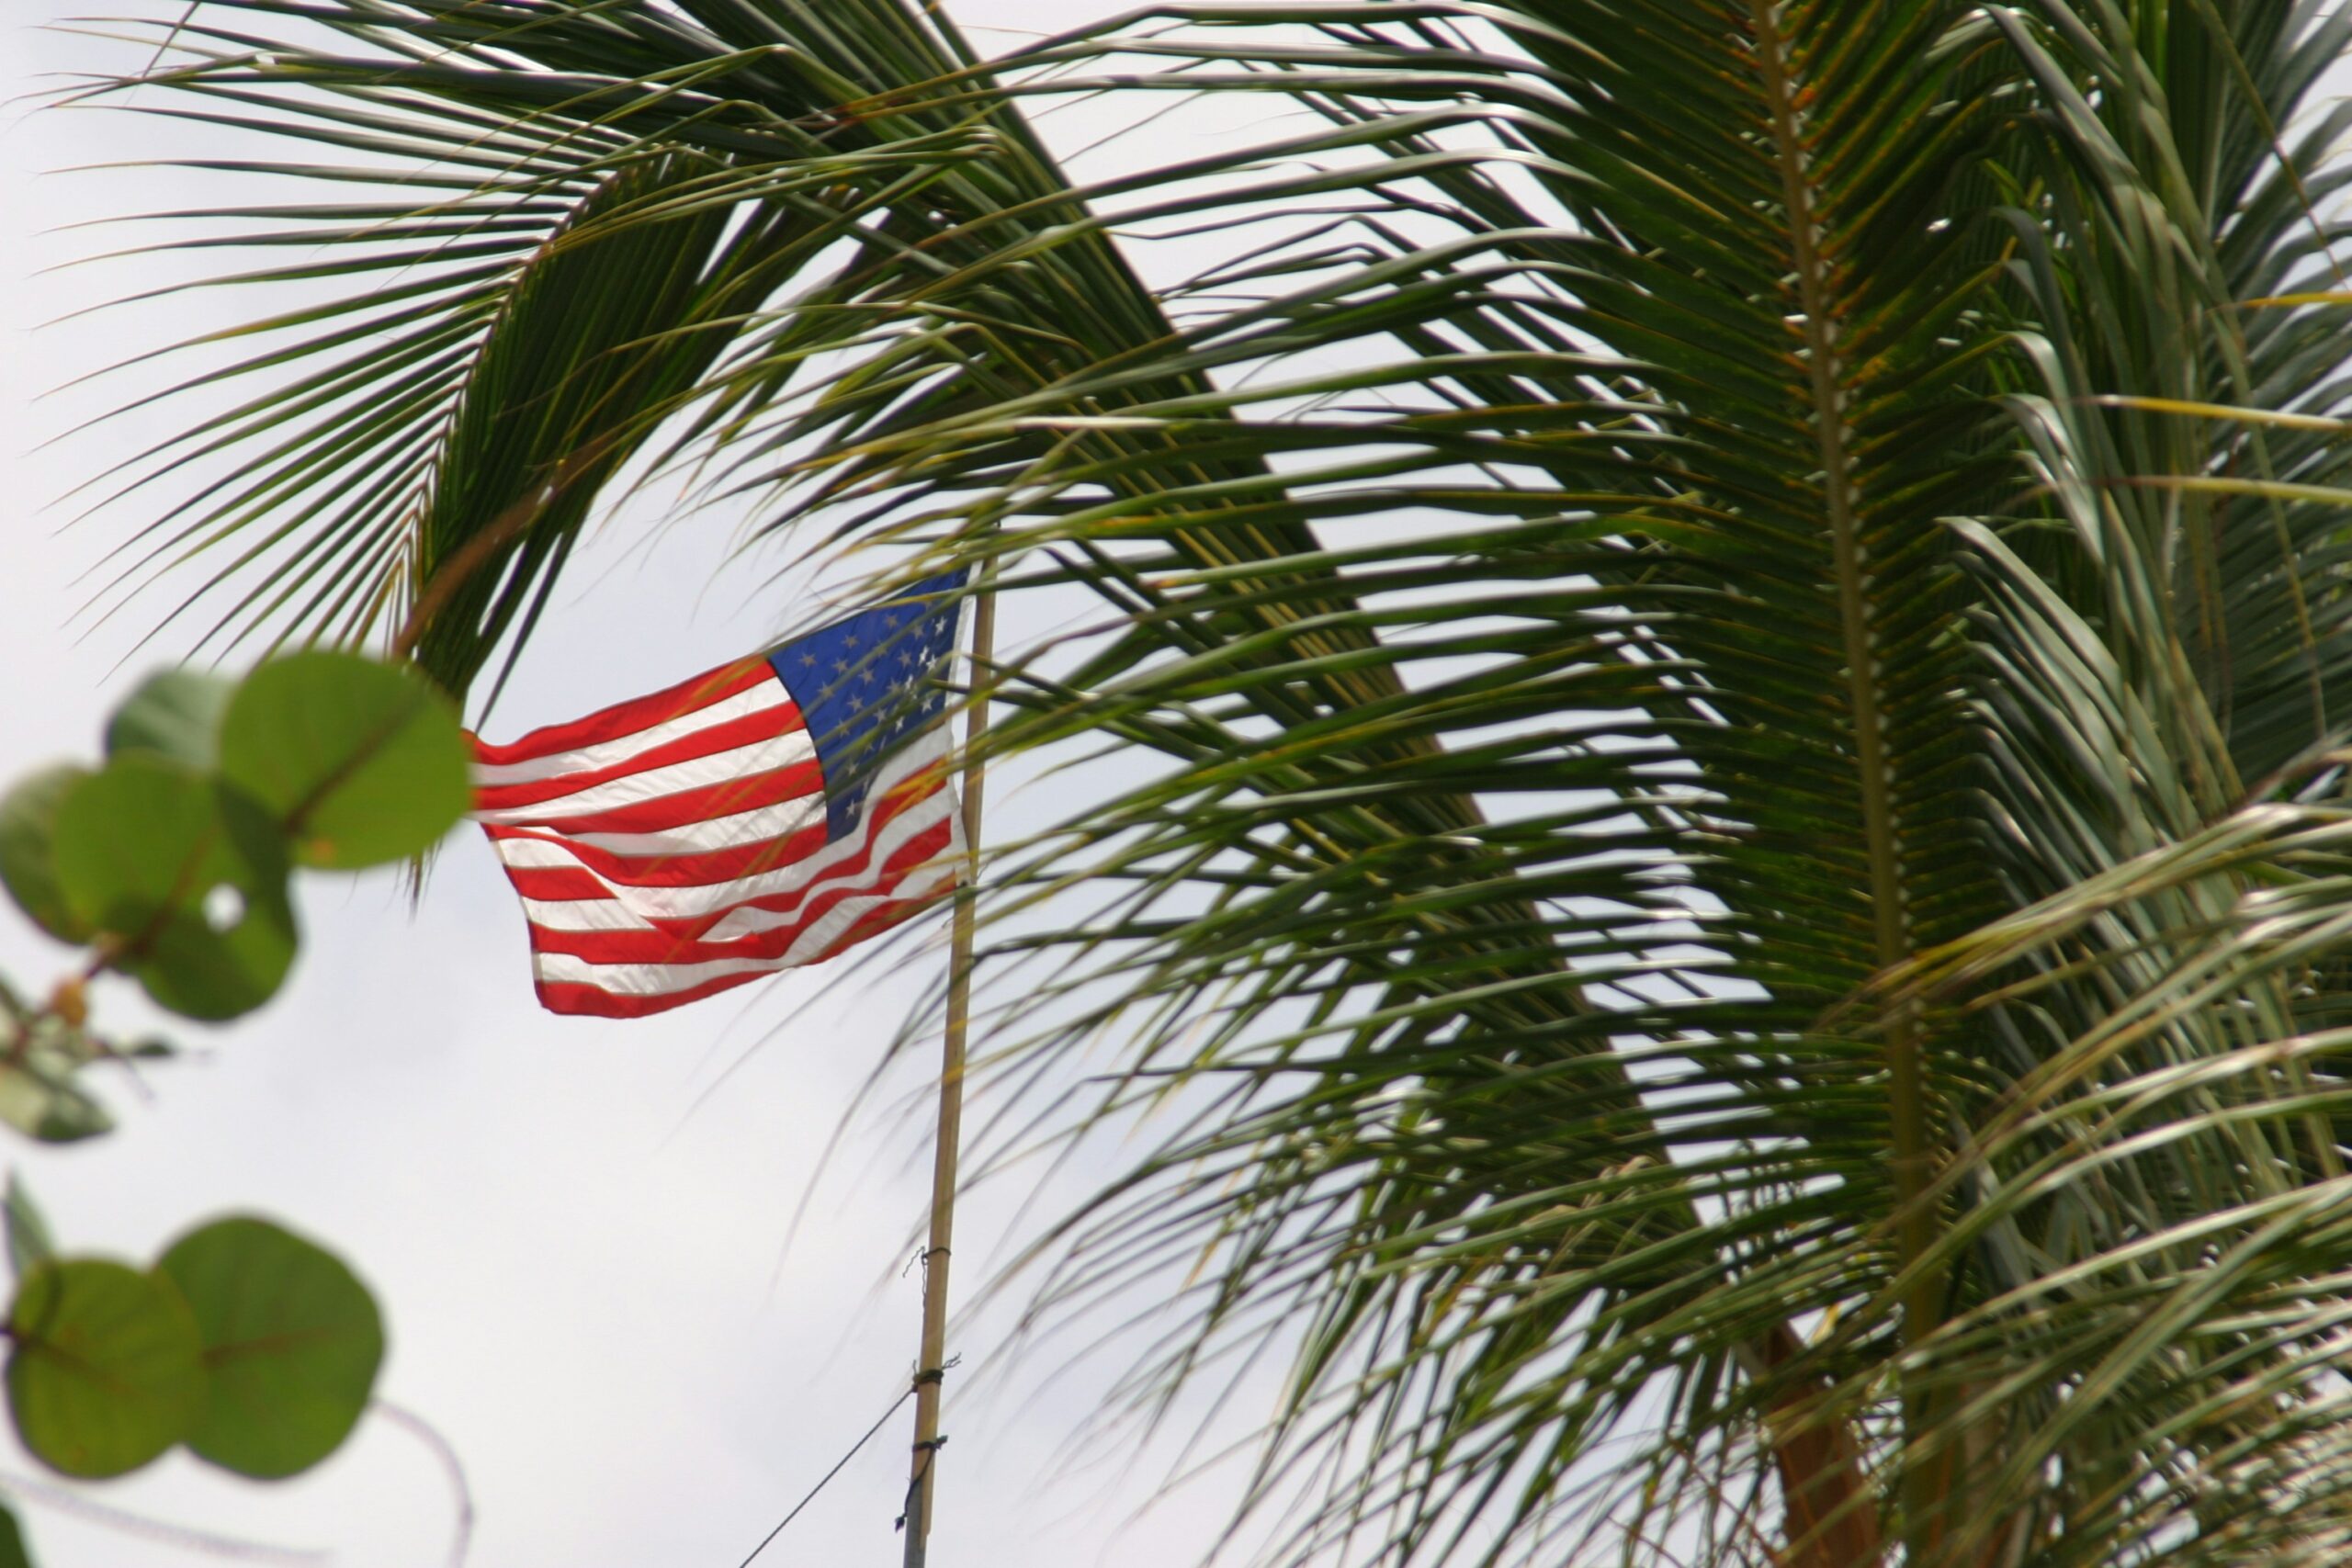 The weather during the spring is why it is the best time to visit the Virgin Islands. 
Pictured: the U.S. flag in tropical destination 